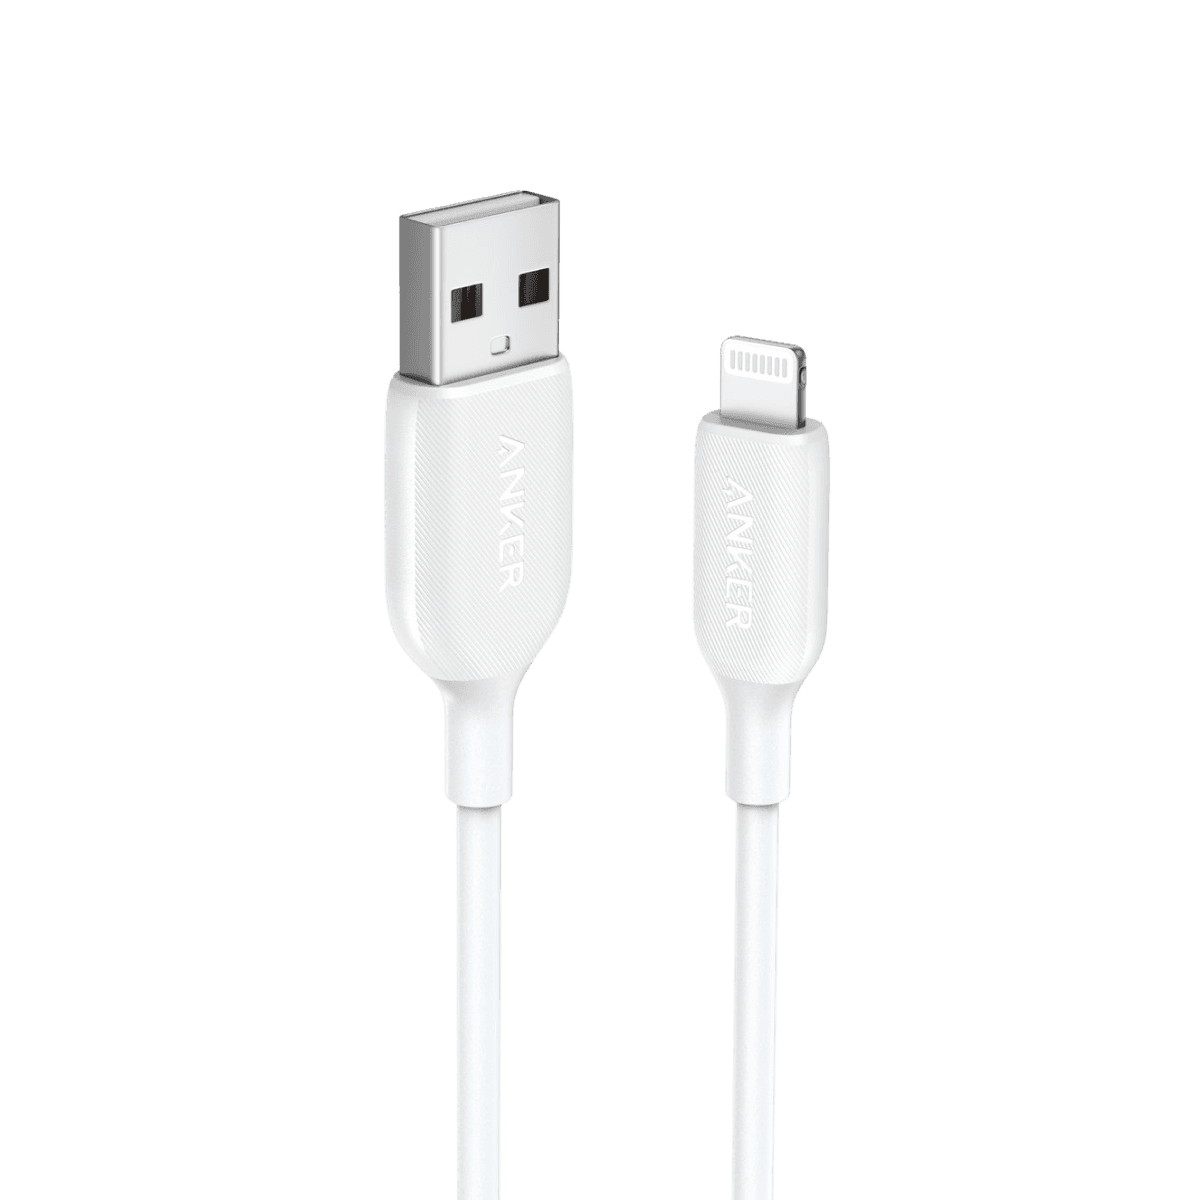 Anker <b>541</b> USB-A to Lightning Cable(3ft / 6ft)